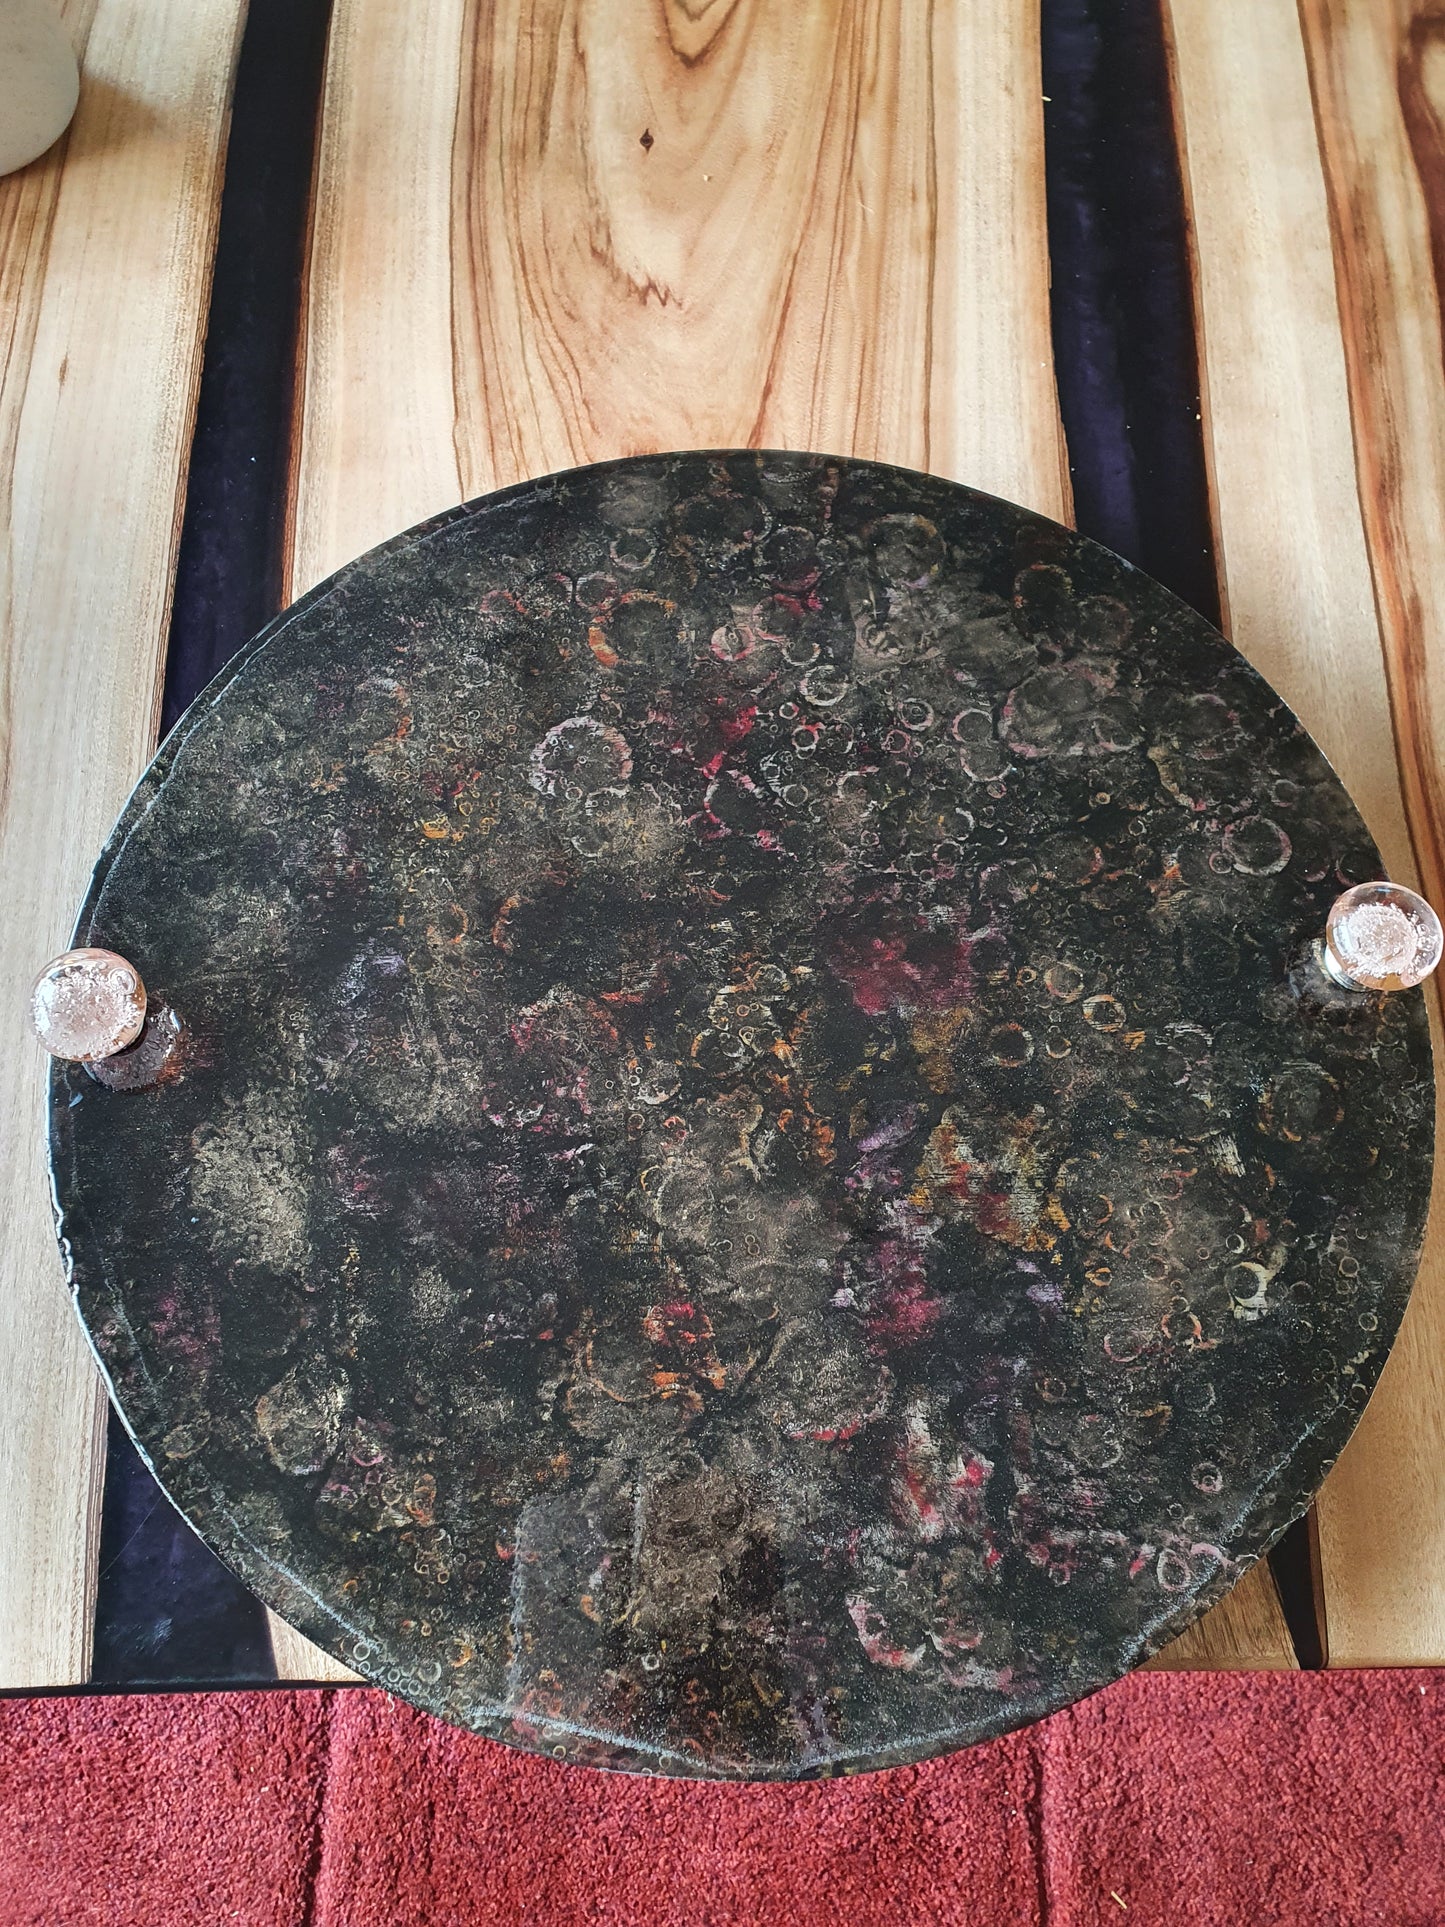 Large round serving board